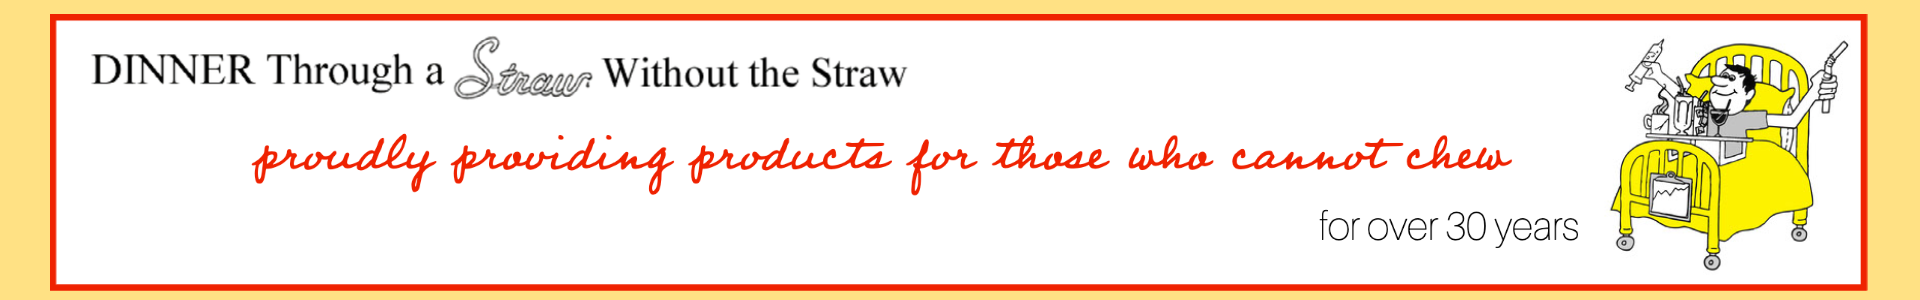 Dinner Through a Straw - providing products for those who cannot chew 1.800.842.3841